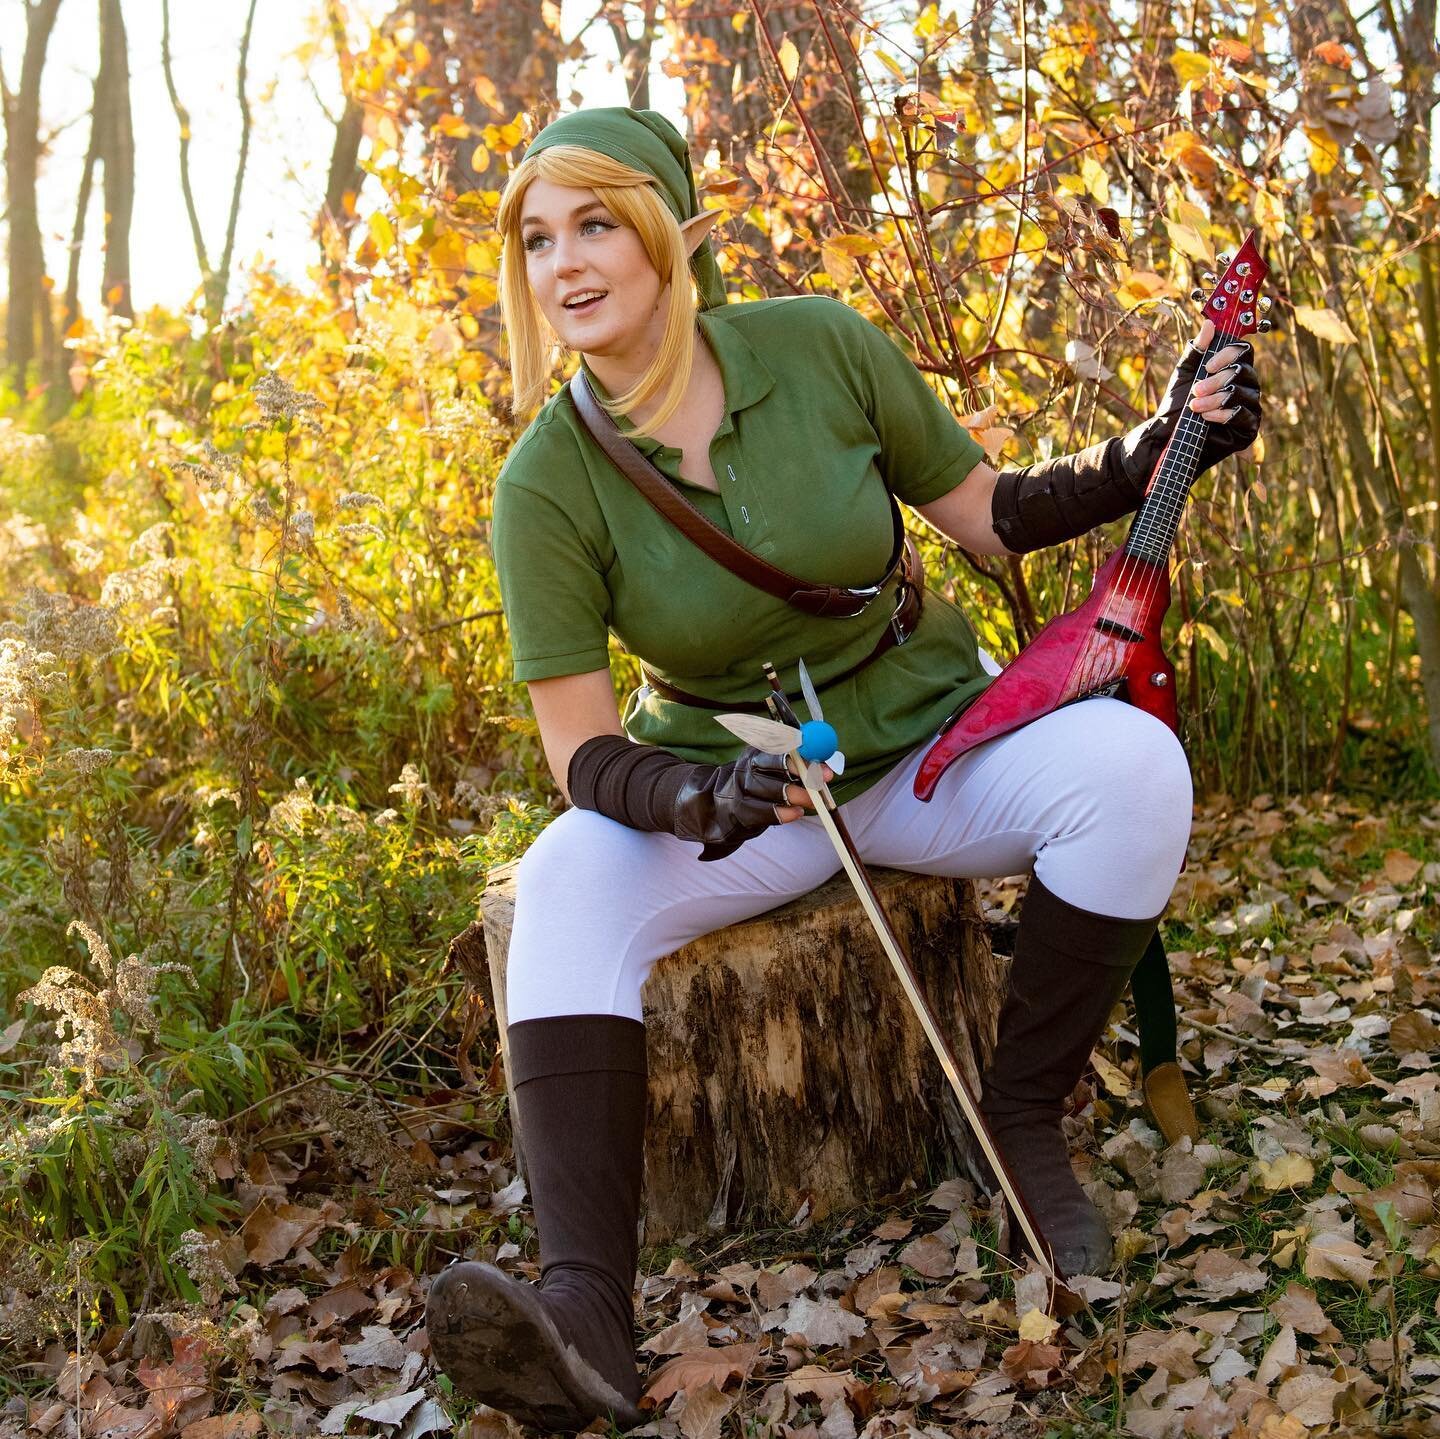 Happy 35th Anniversary Legend of Zelda!!! 
-
Legend of Zelda ocarina of time was the first video game I ever played at my friends house in elementary school. I was SO bad at it (I don&rsquo;t think I ever even found my way out of the forest maze) but